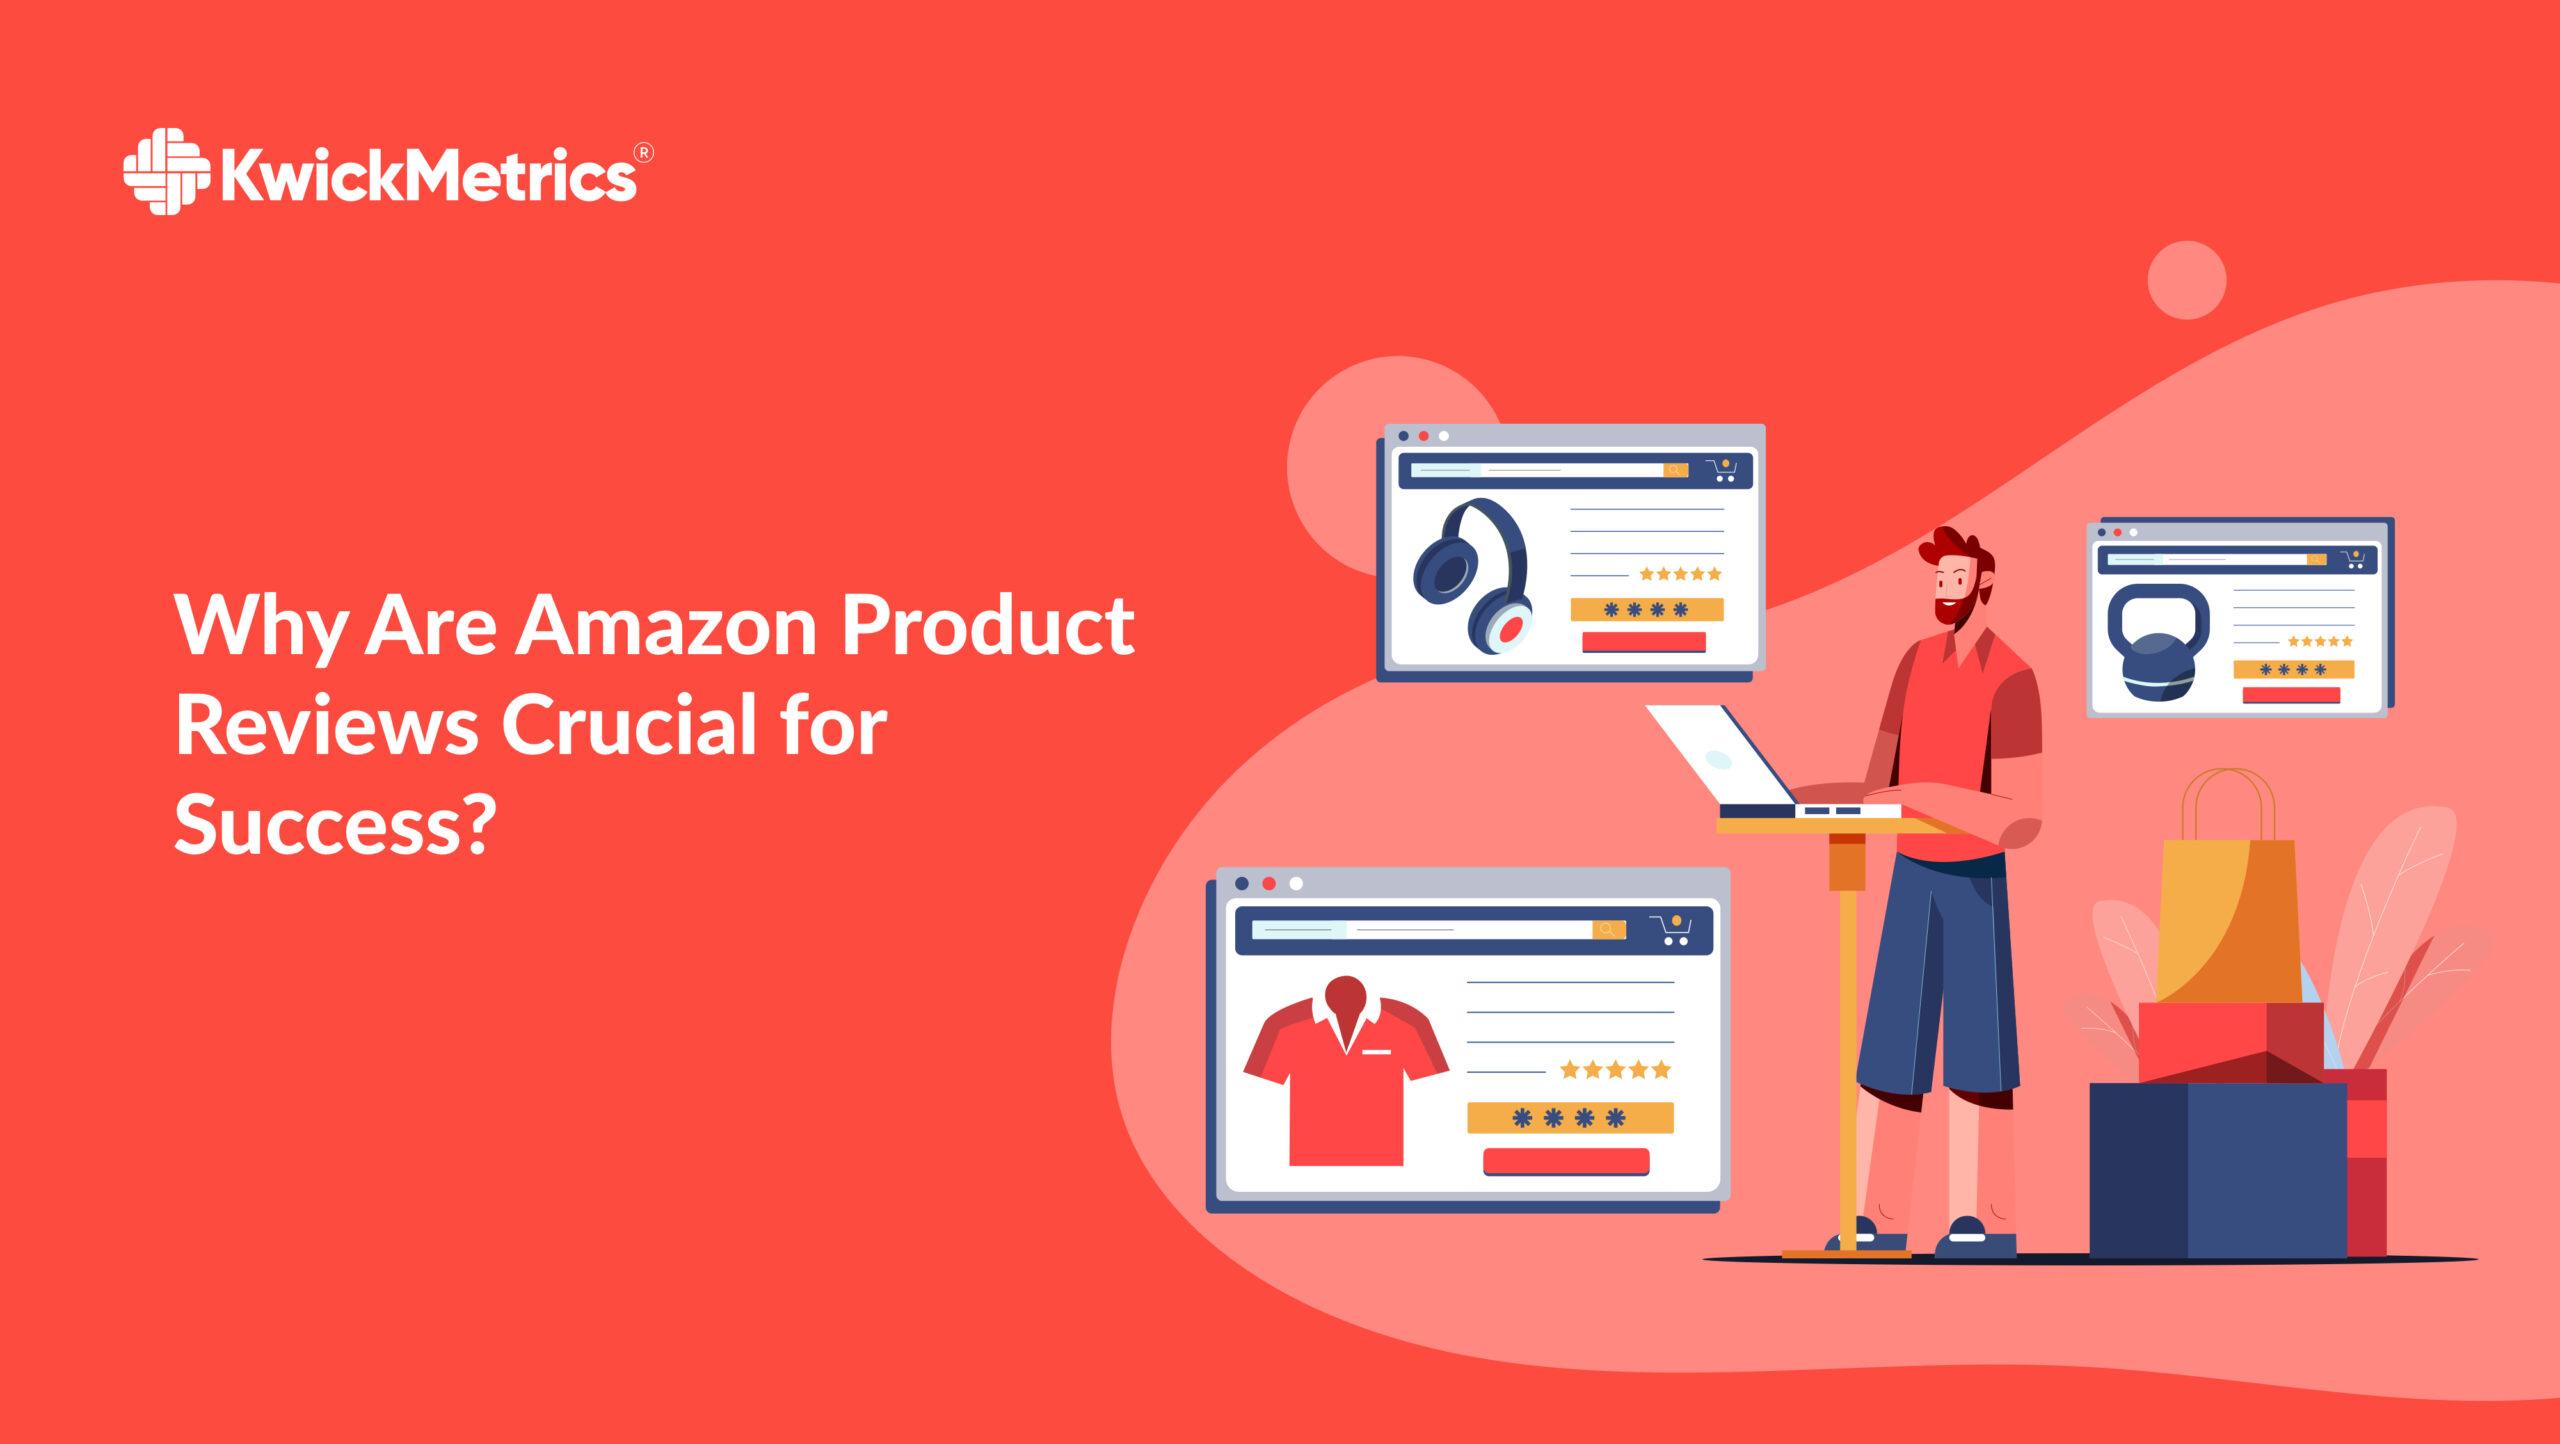 Why Are Amazon Product Reviews Crucial for Success?